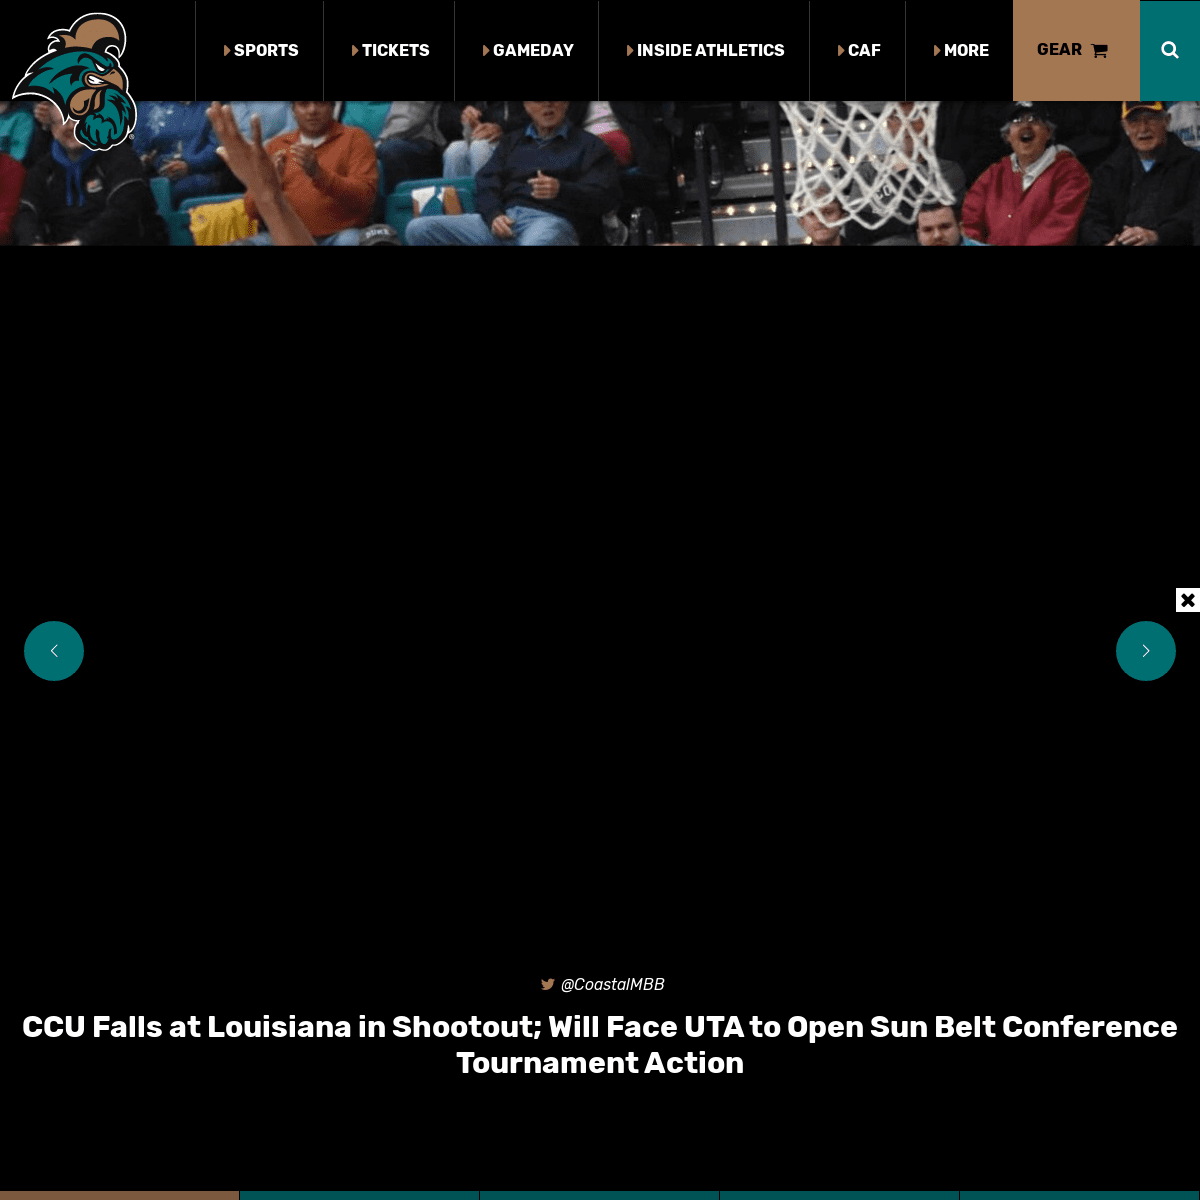 A complete backup of goccusports.com